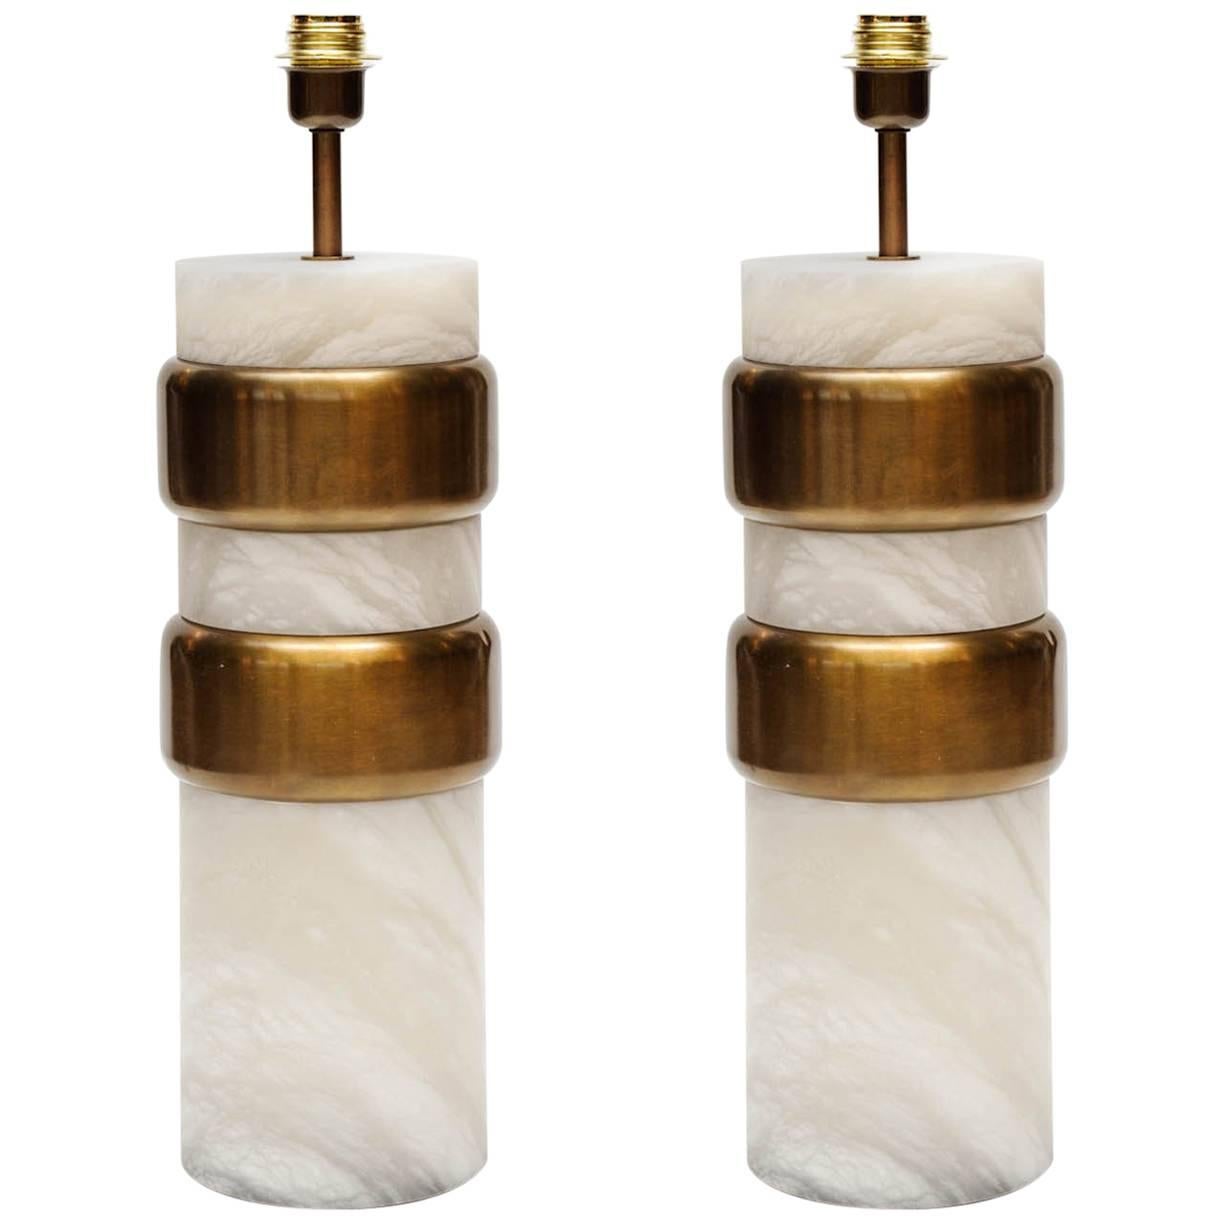 Glustin Luminaires Creation Pair of Alabaster Lamps with Brass Rings